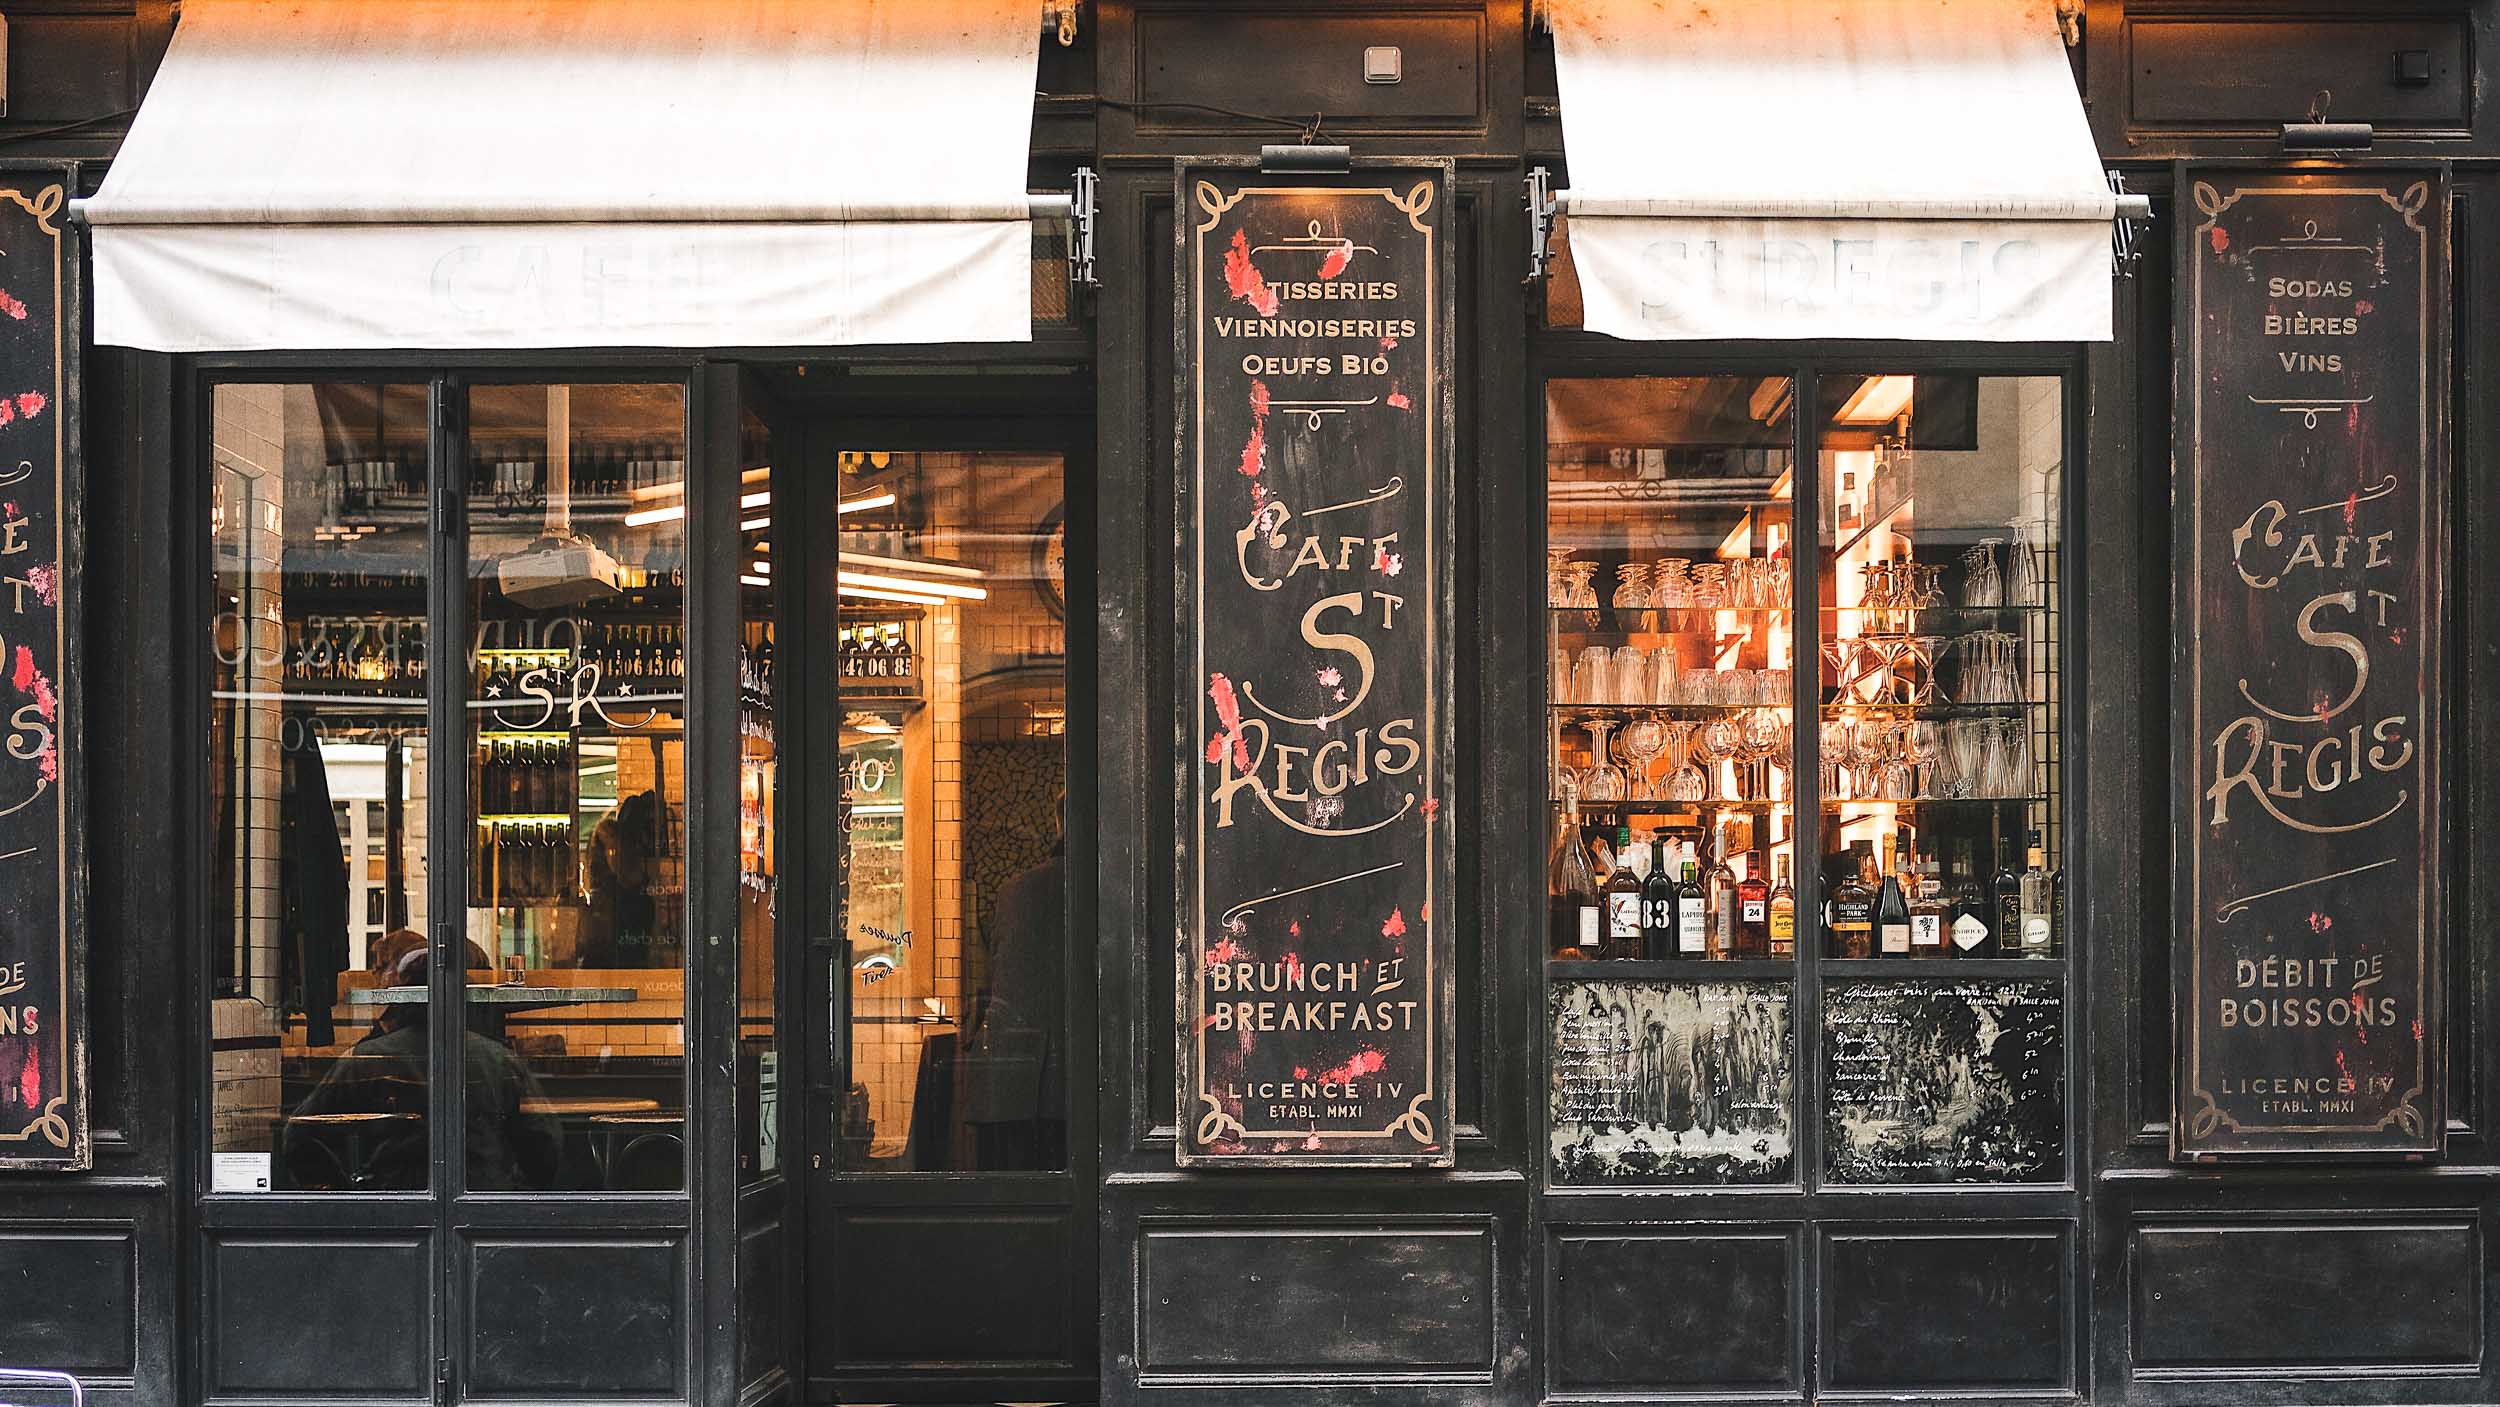 The best Paris itinerary includes a can't miss breakfast spot in Paris; Le St. Regis Cafe